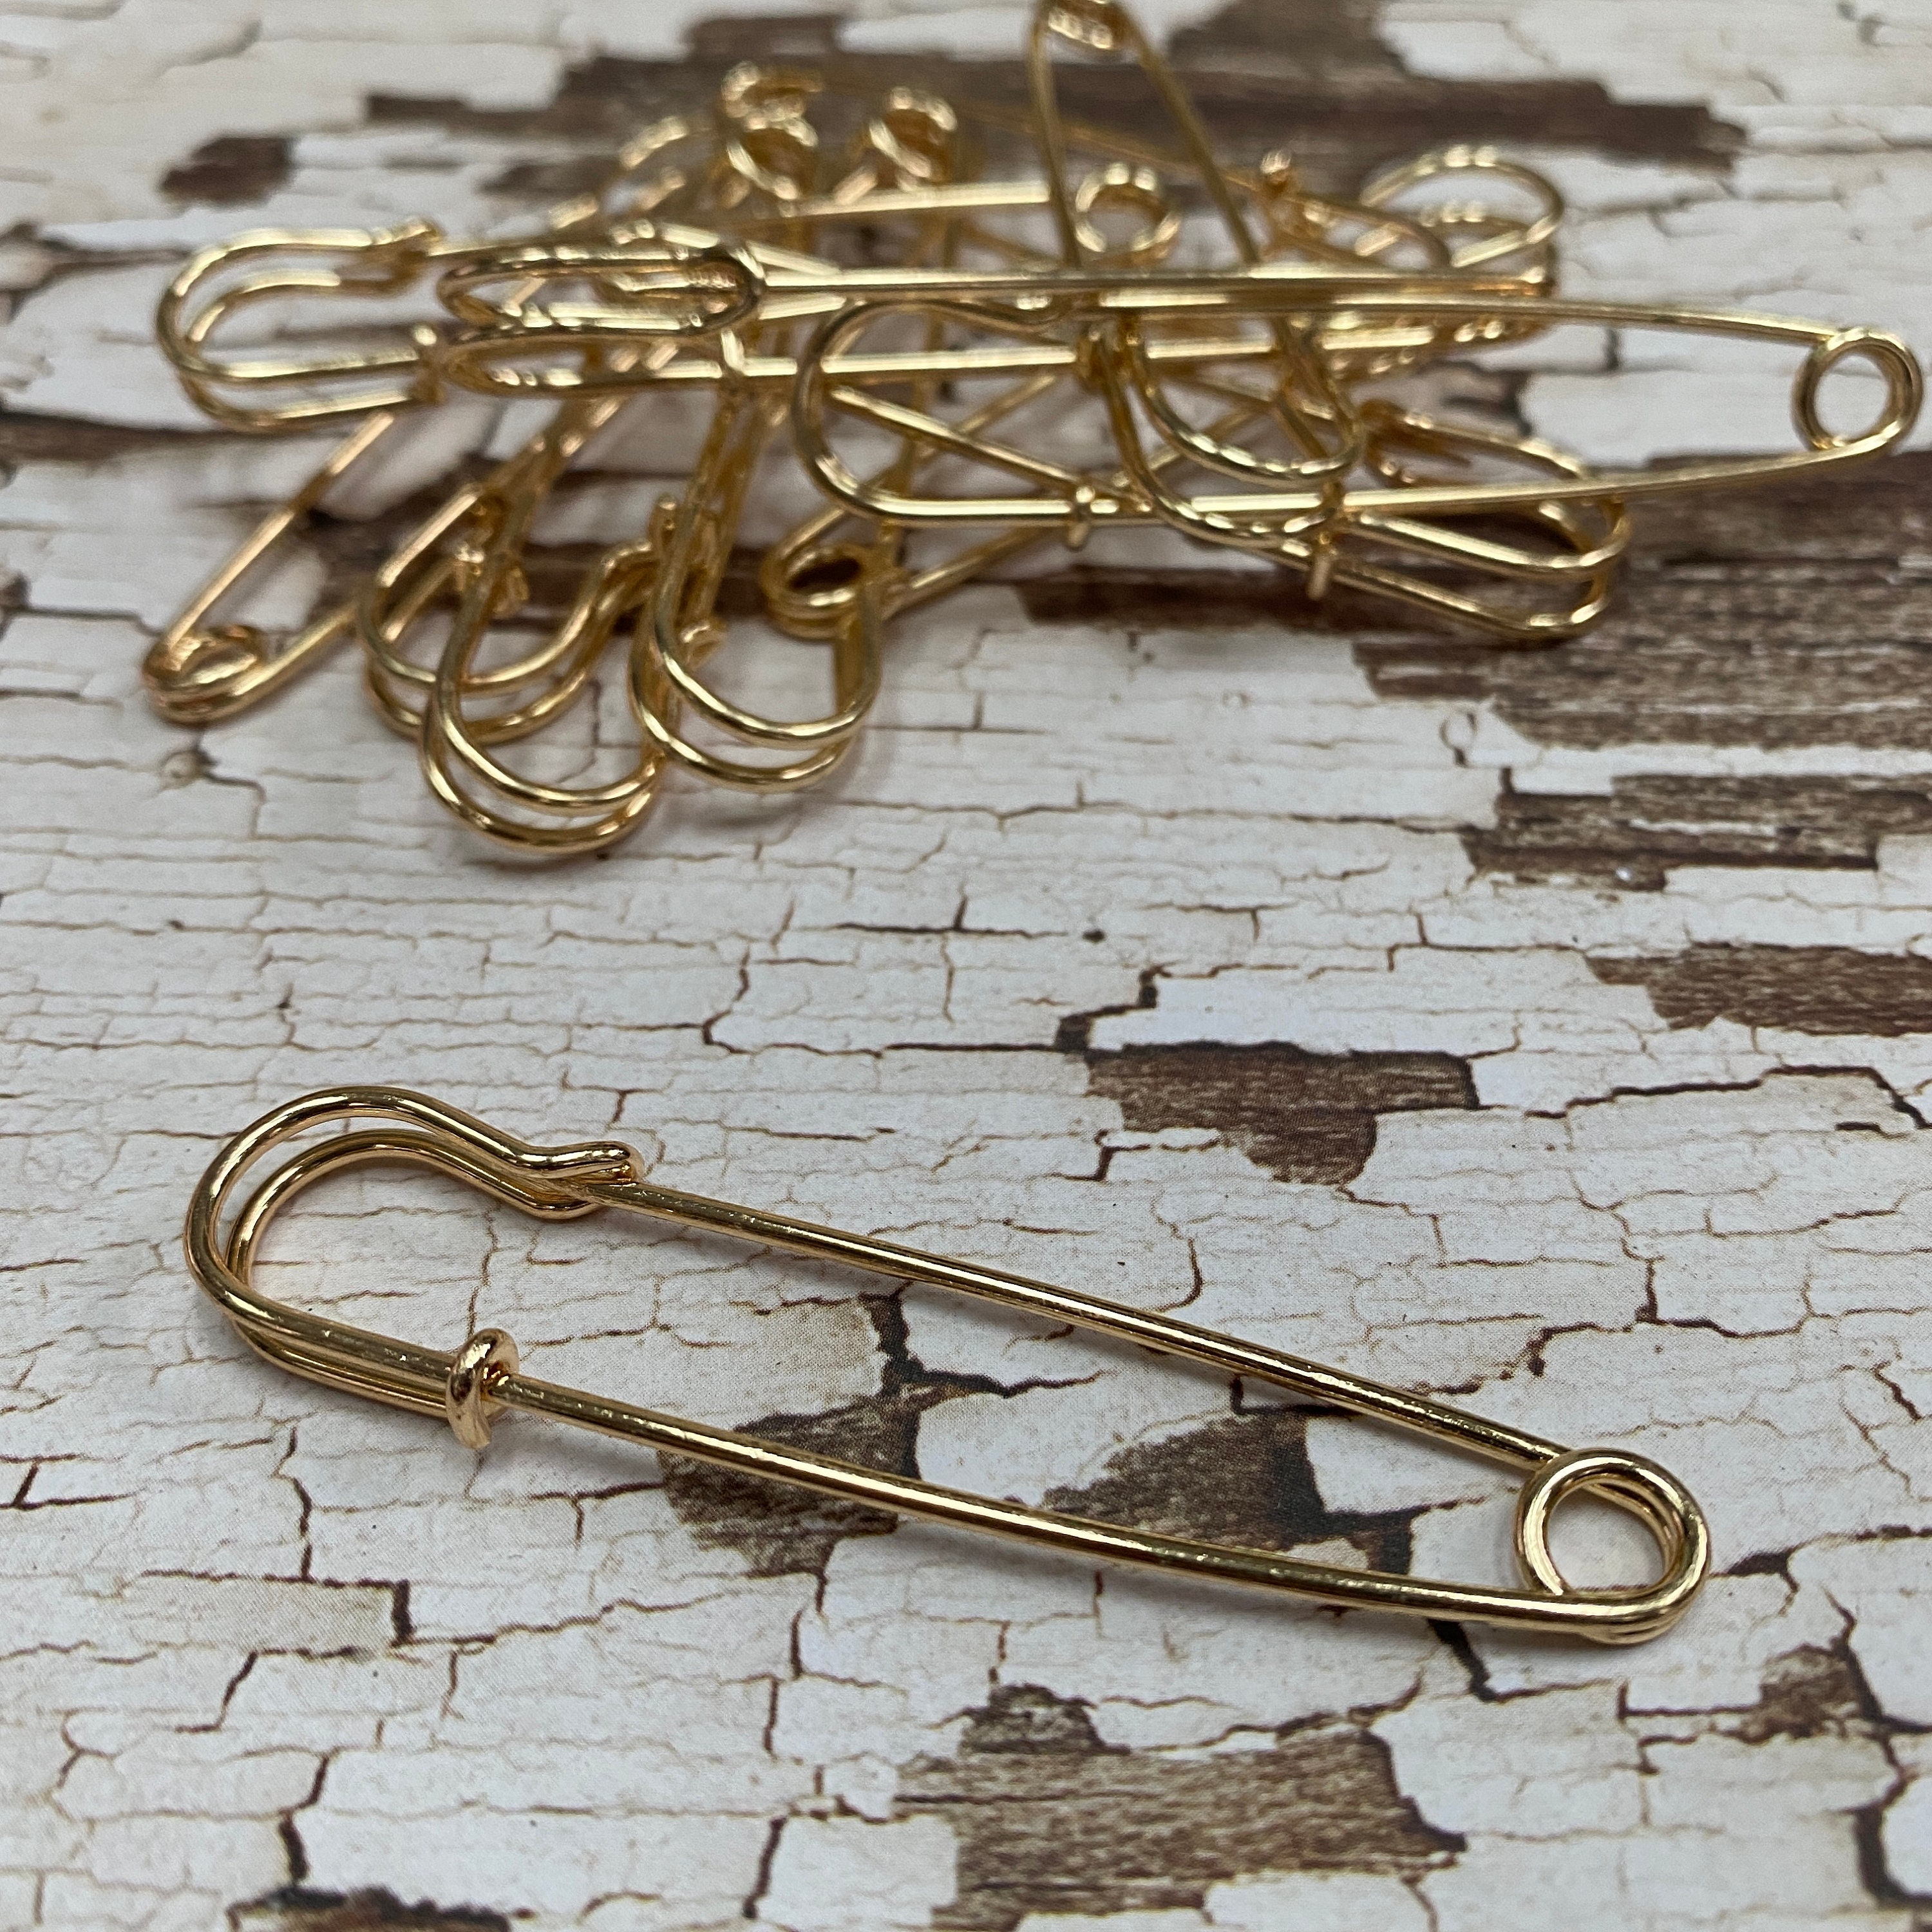 10pcs Extra Large Gold Strong Heavy Duty Safety Pins Craft Jewelry